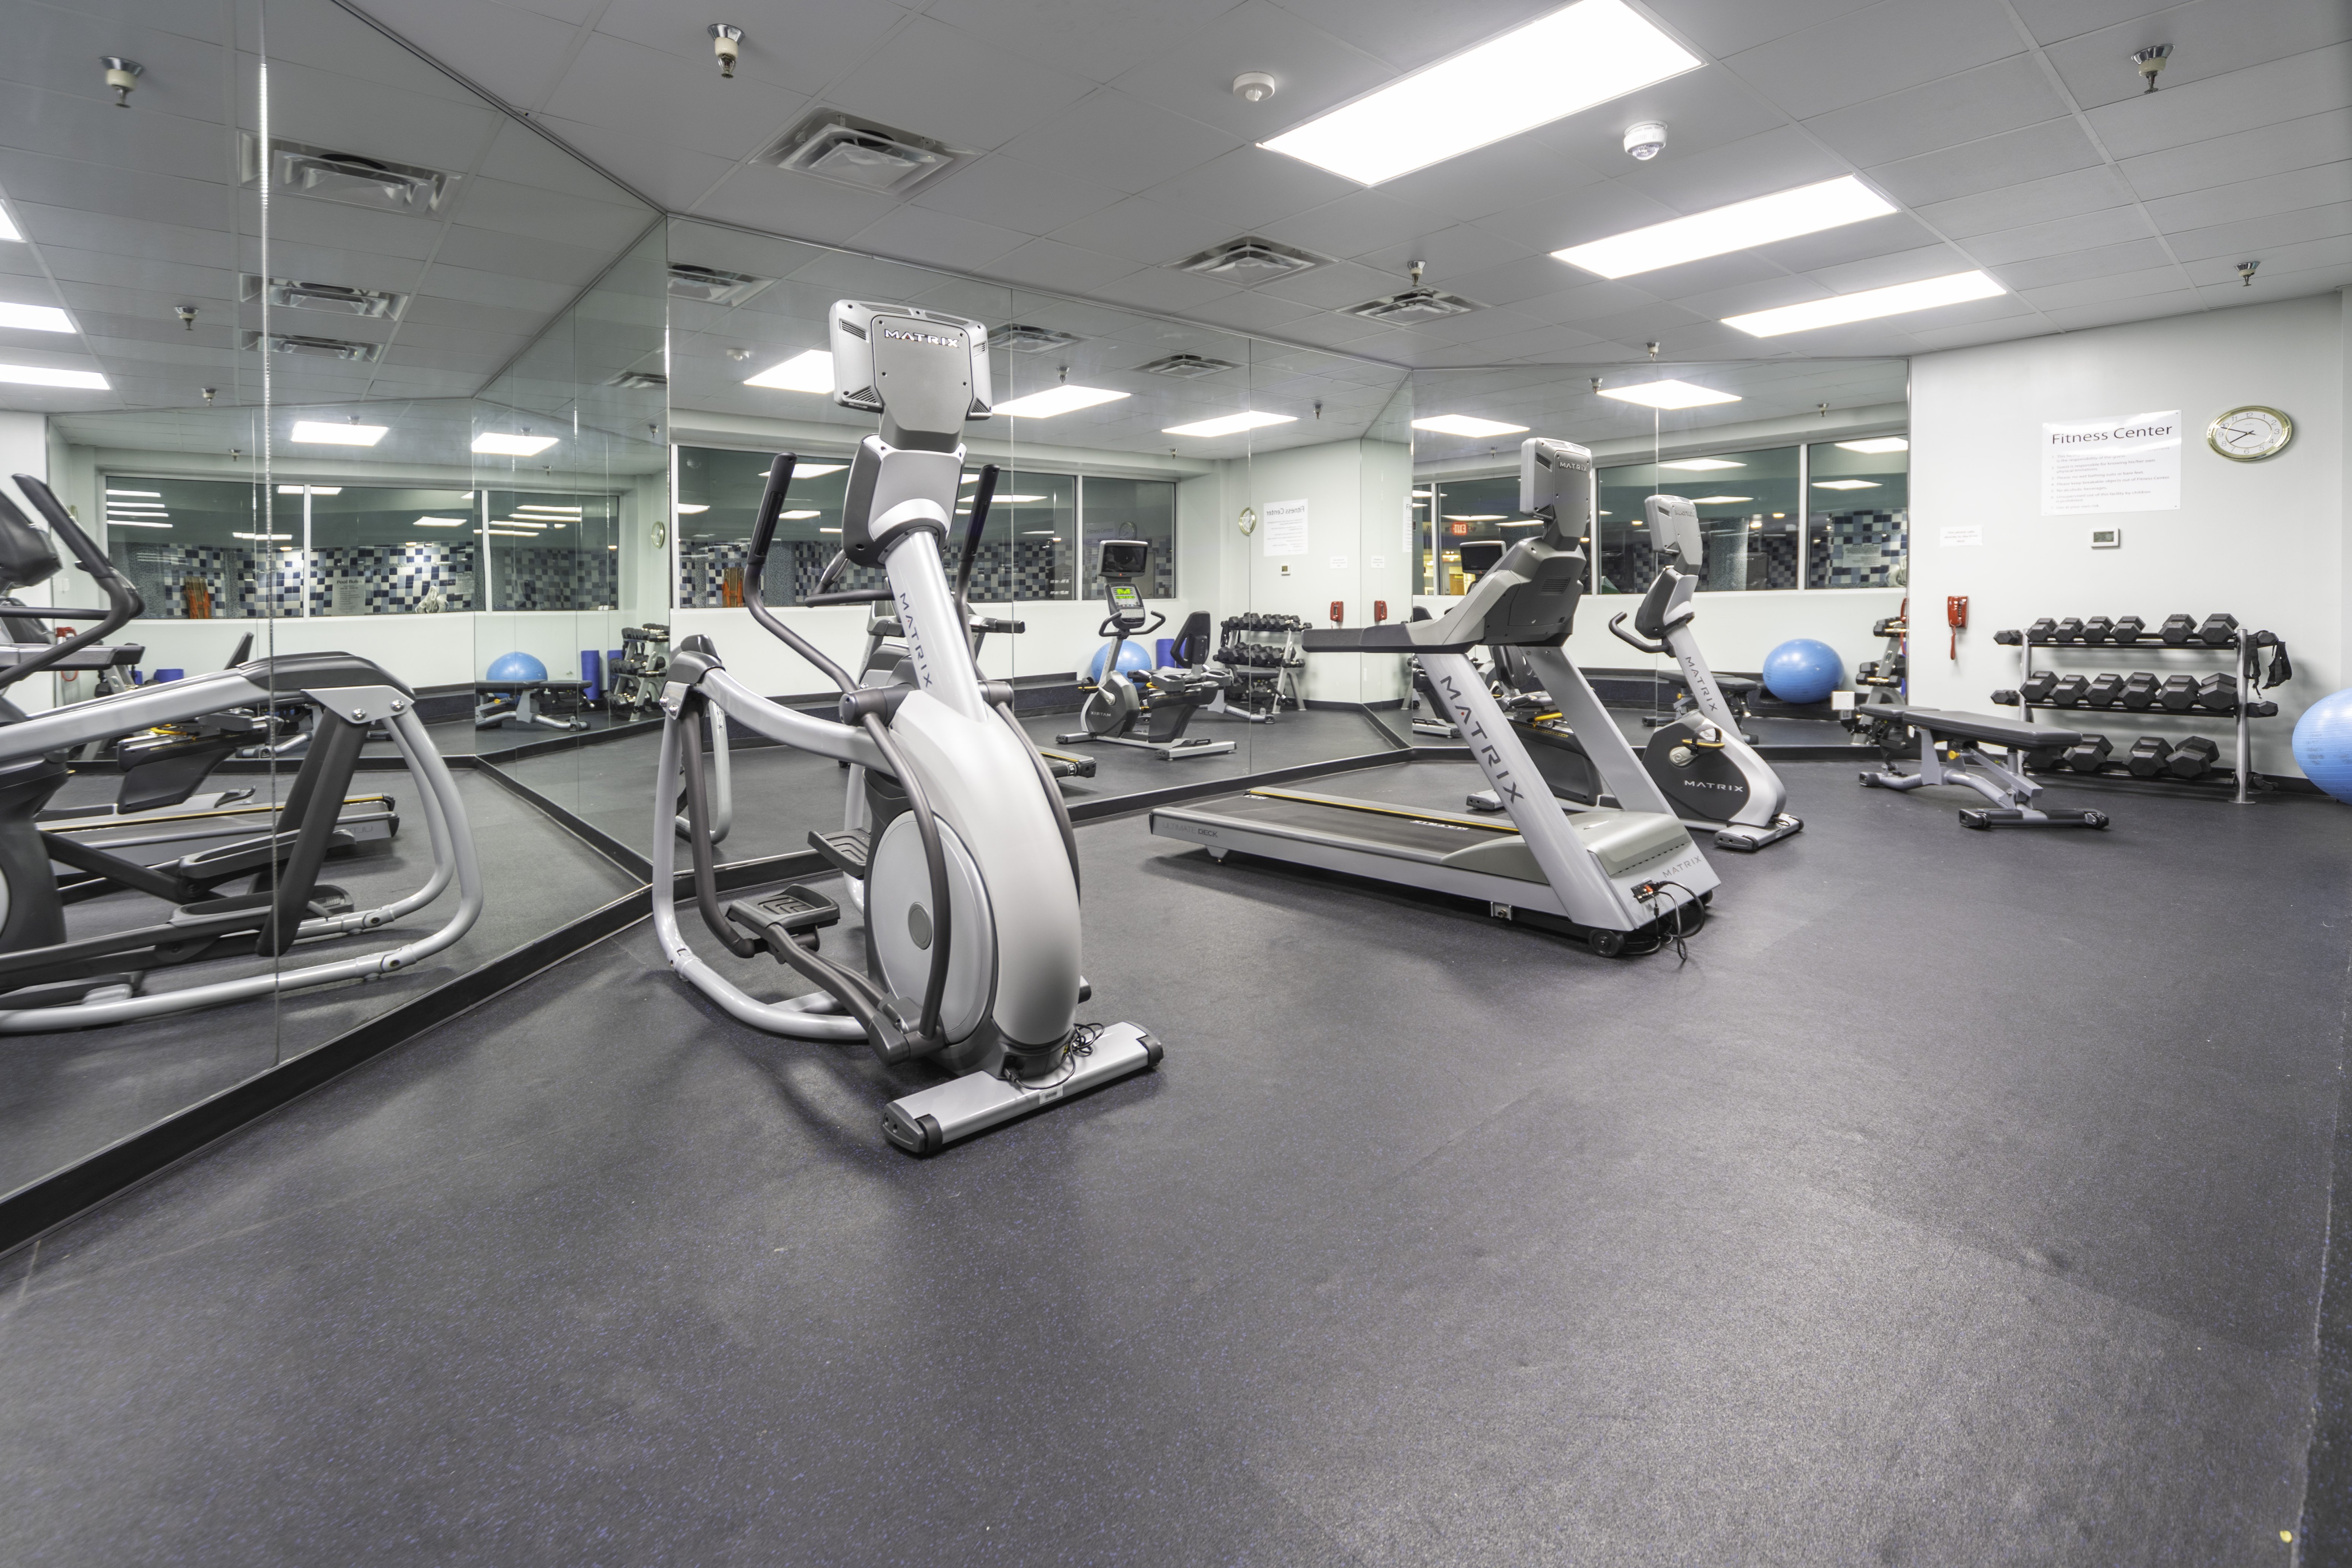 Our Fitness Center is open from 6 AM to 10 PM.